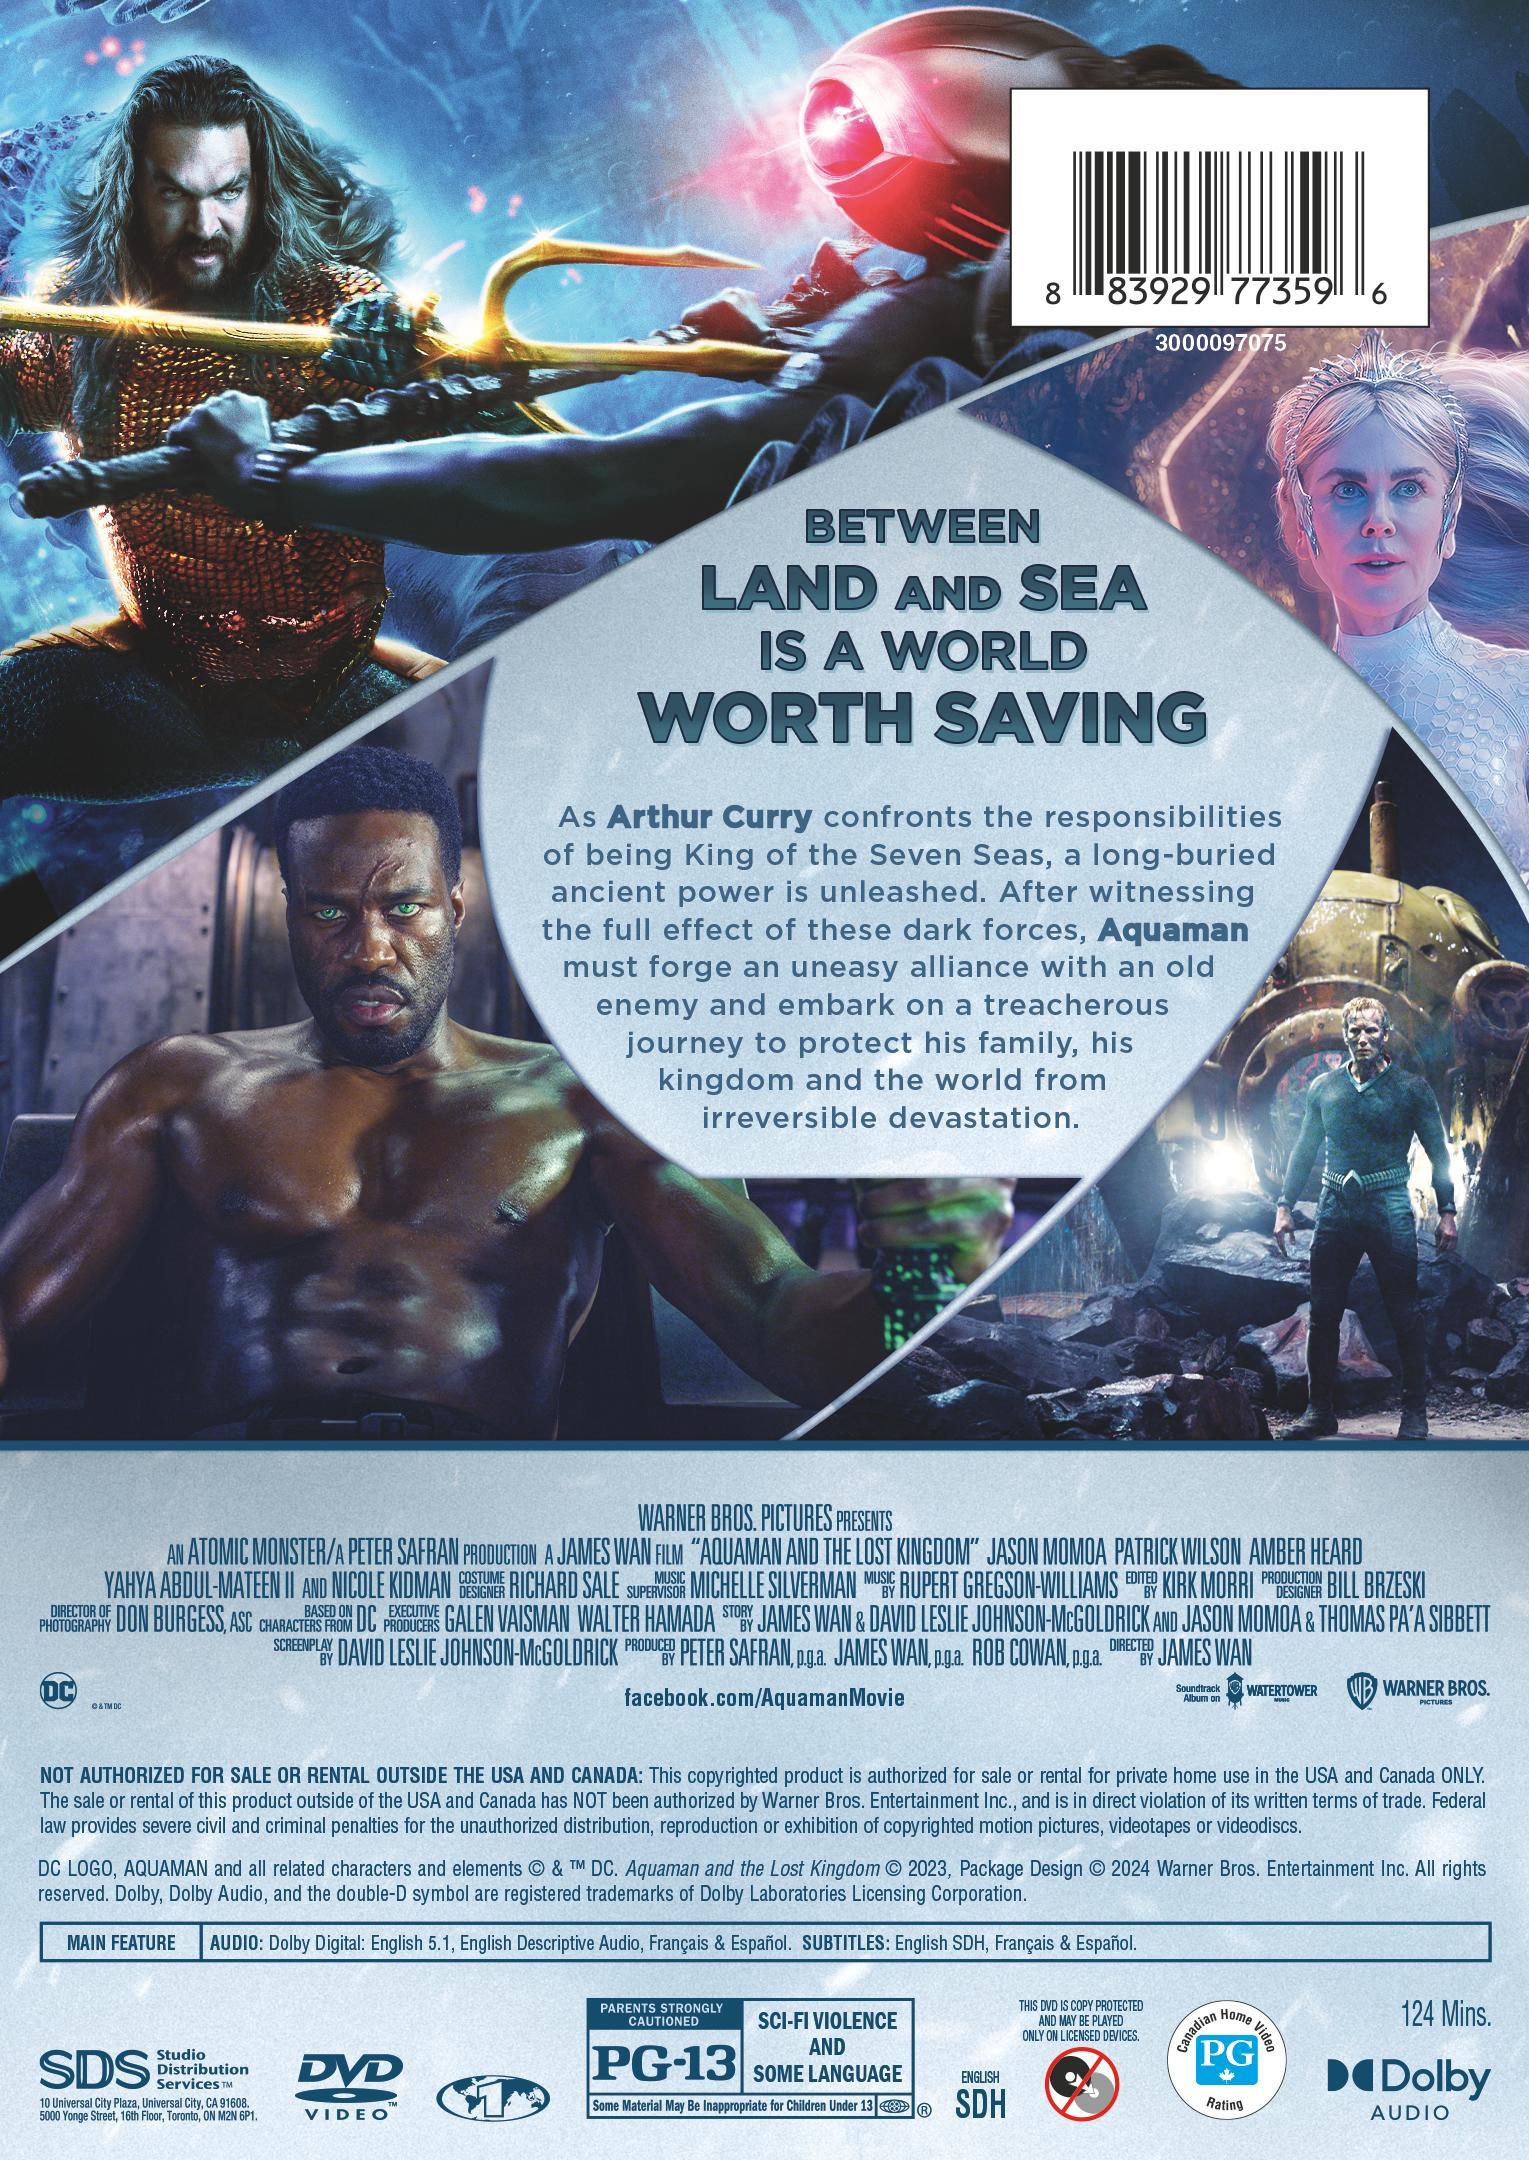 Aquaman and the Lost Kingdom (DVD) - image 3 of 7